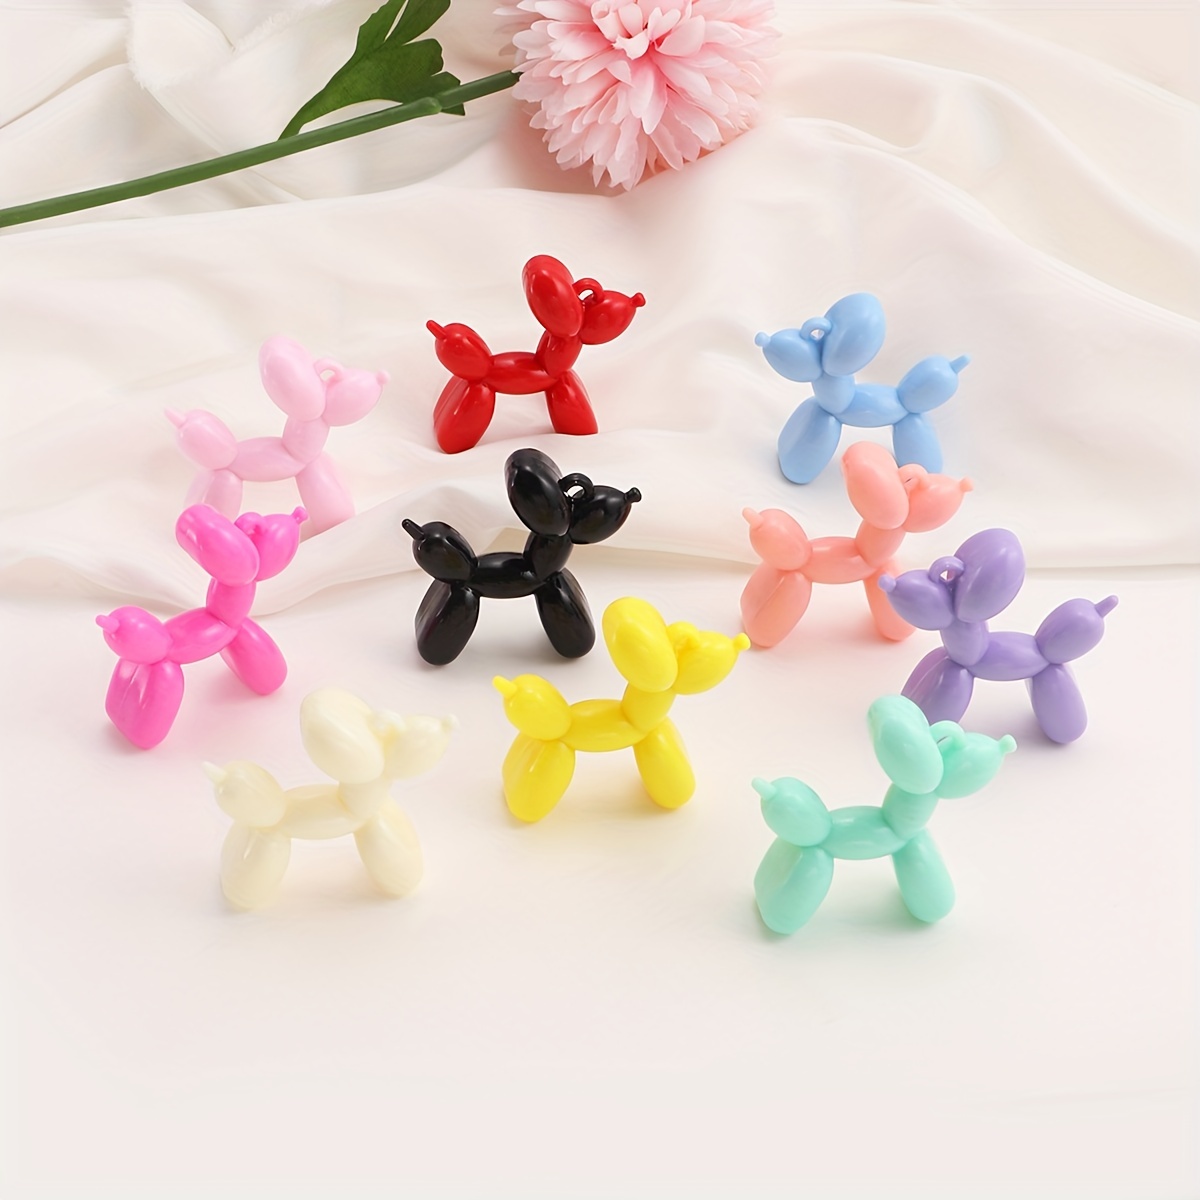 

10pcs Mixed Solid Colors Cute Balloon Puppy Shape Resin Charms For Earring Hair Accessories Stationery Phone Case Keychain Holshoe Decors Fridge Stickers Diy Crafting Jewelry Accessory Making Supplies